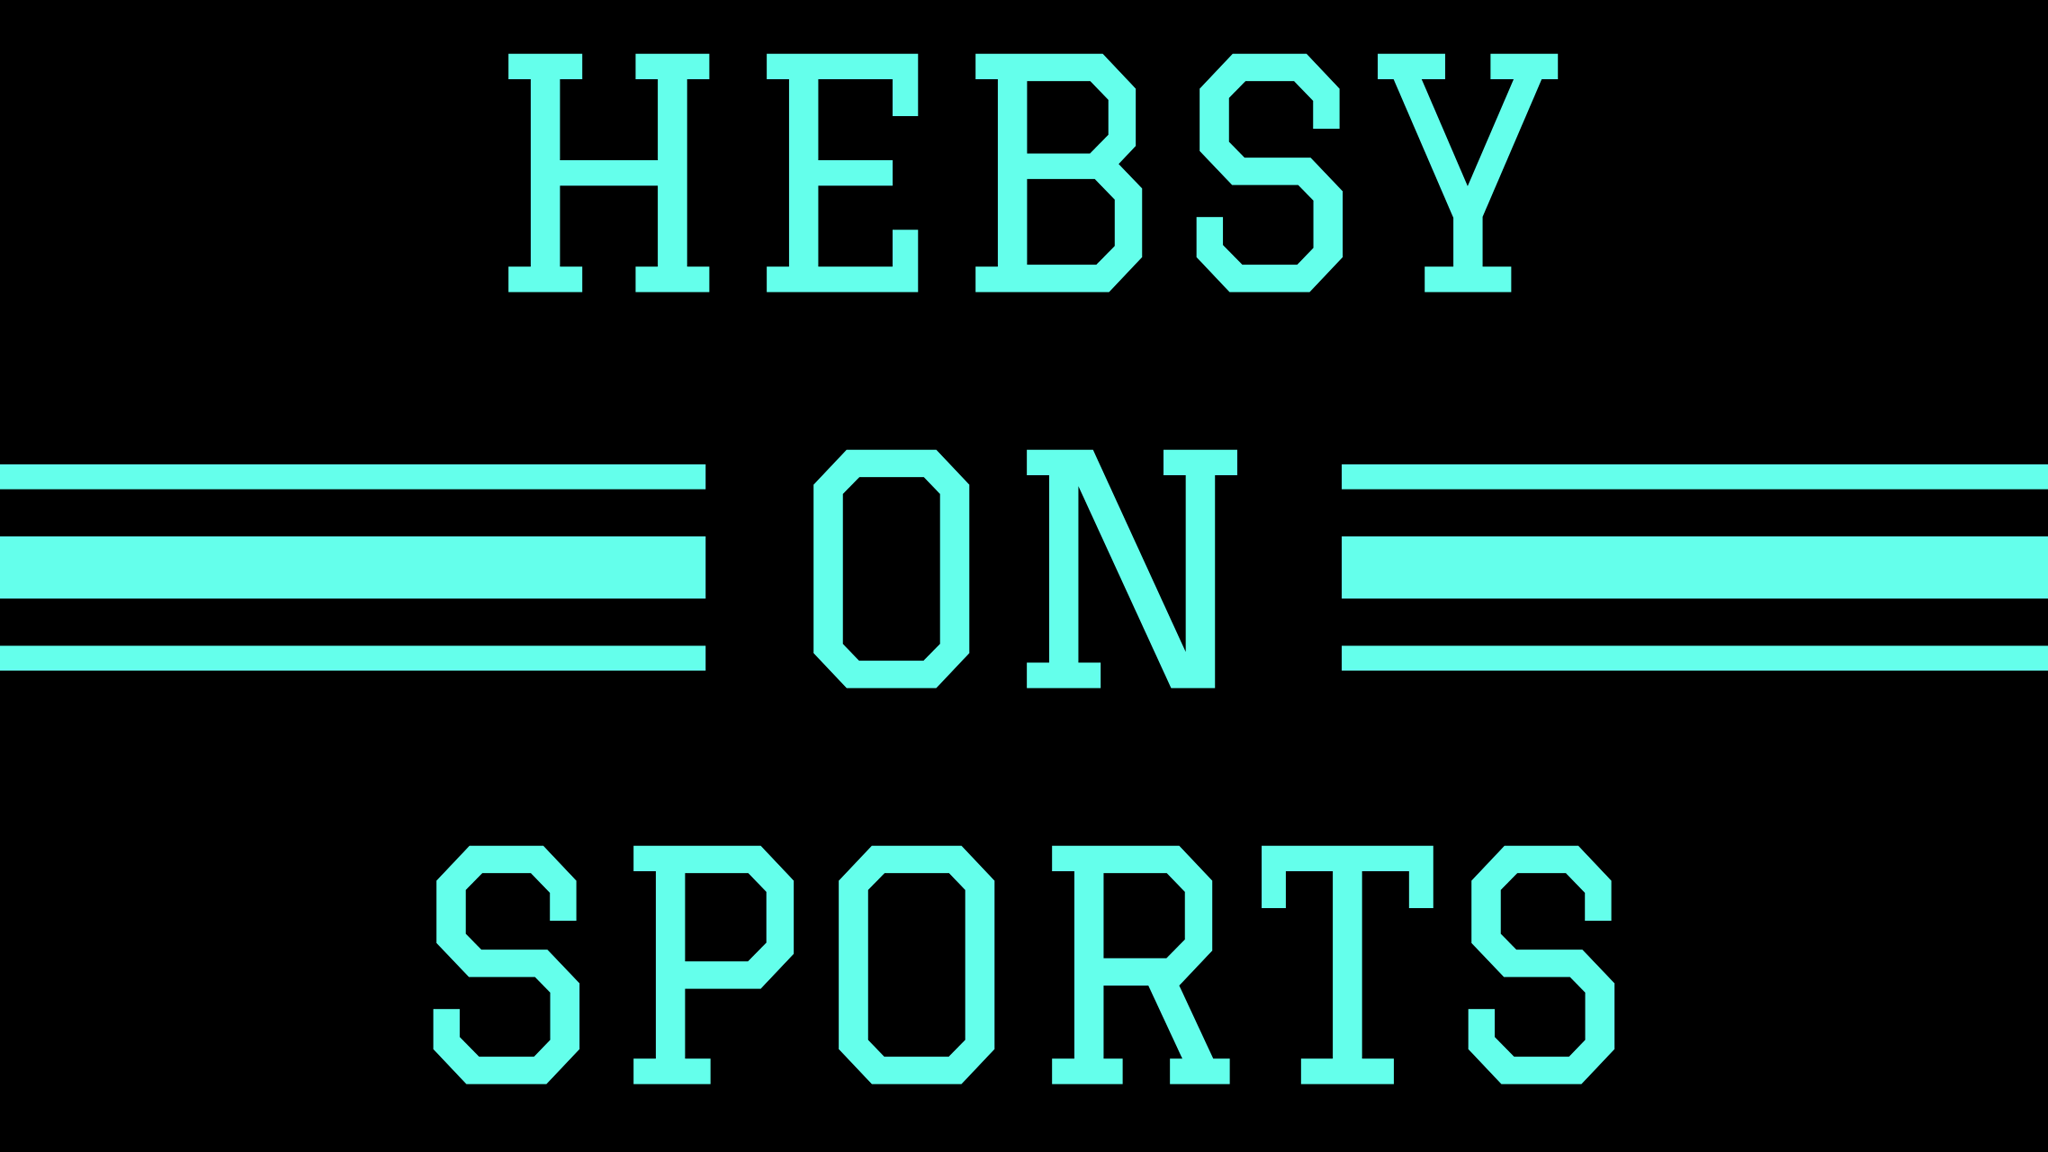 Hebsy on Sports for June 11, 2021